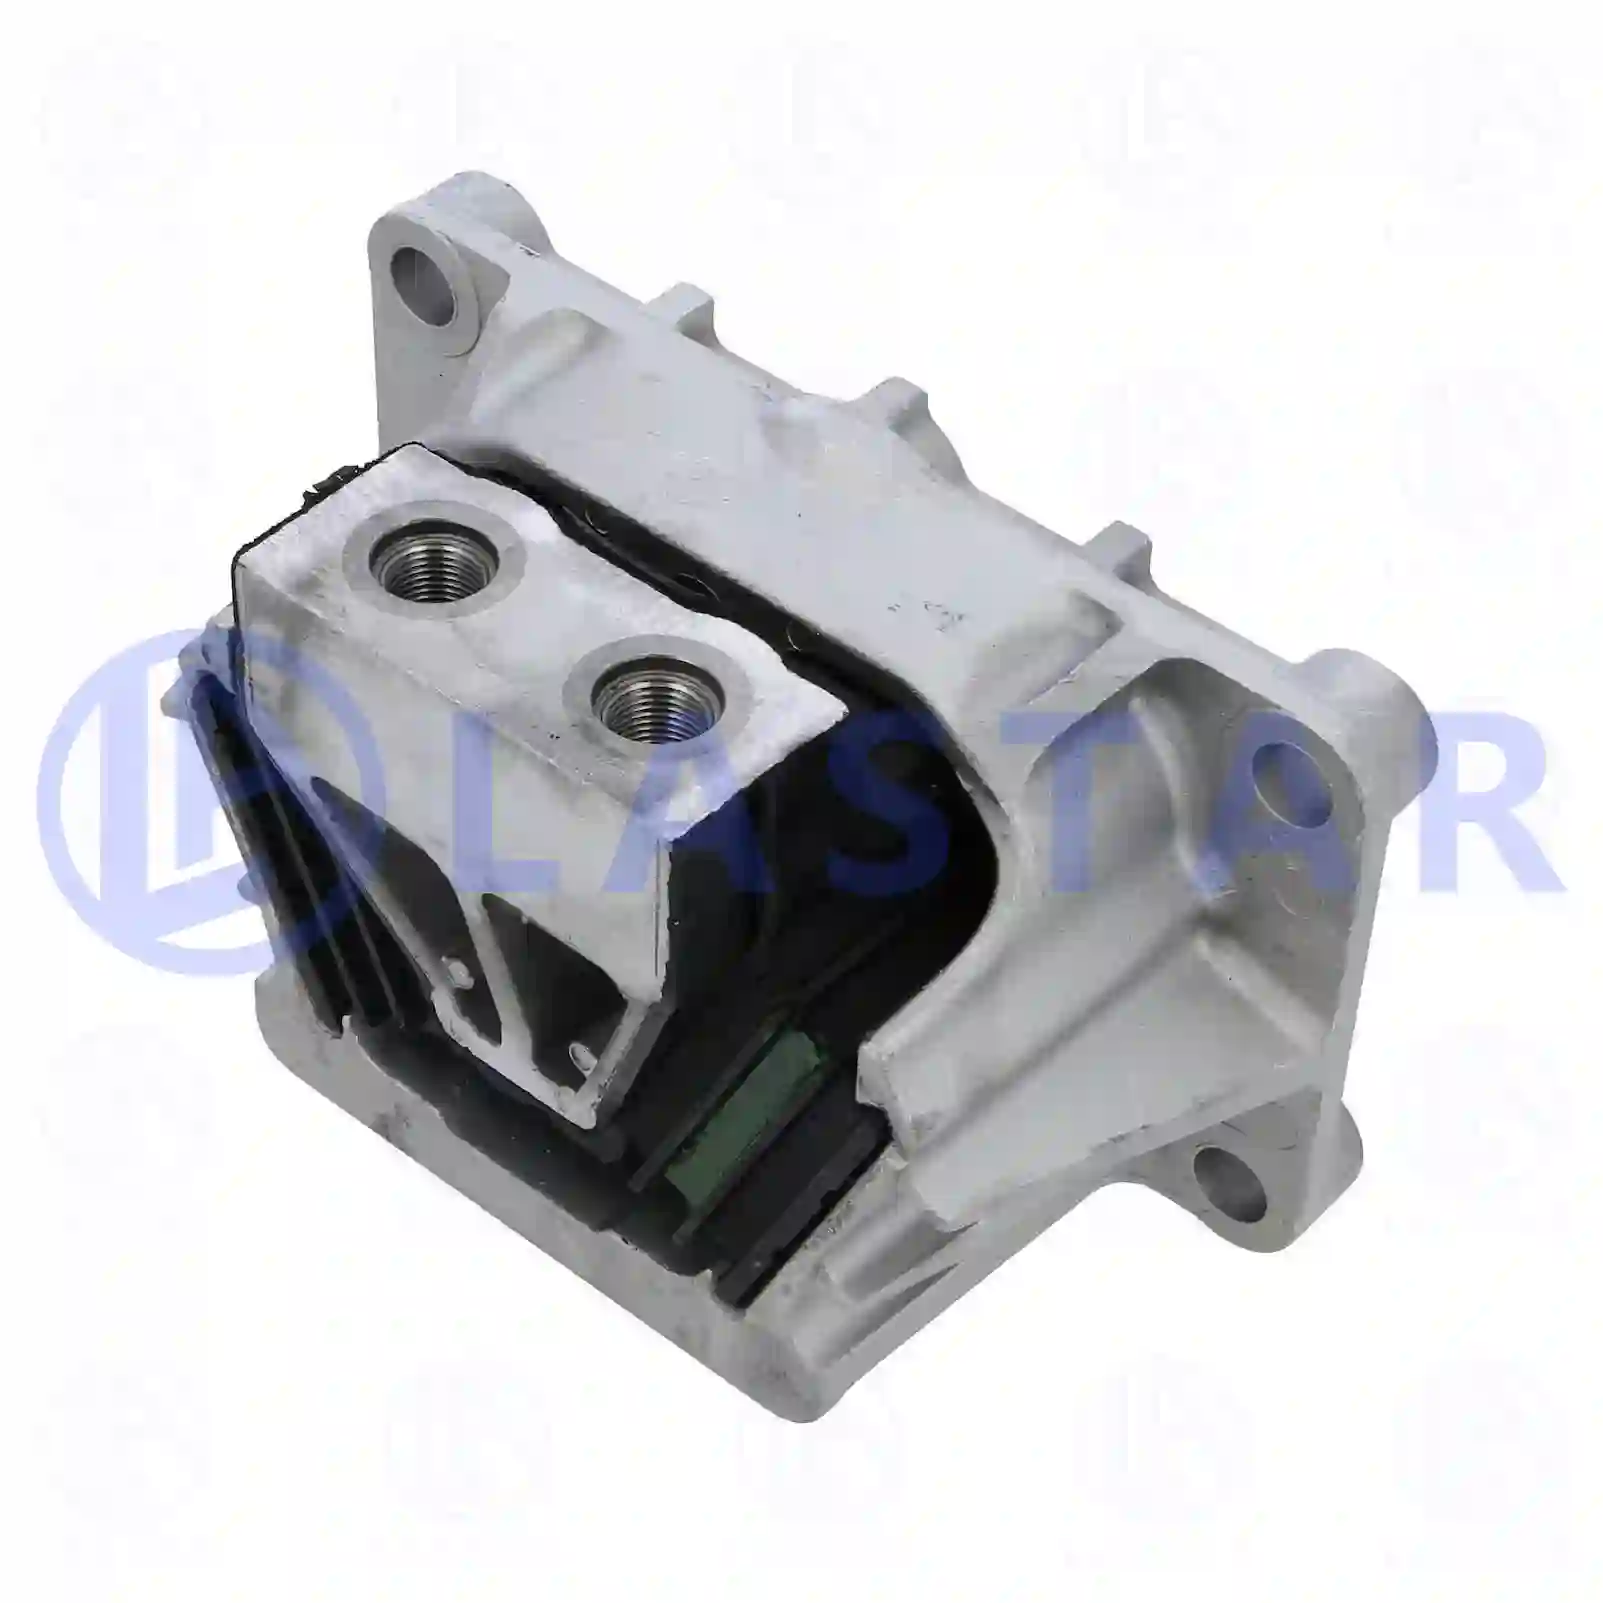 Engine mounting, 77702424, 6292400017, 6292400217, ZG01104-0008, ||  77702424 Lastar Spare Part | Truck Spare Parts, Auotomotive Spare Parts Engine mounting, 77702424, 6292400017, 6292400217, ZG01104-0008, ||  77702424 Lastar Spare Part | Truck Spare Parts, Auotomotive Spare Parts